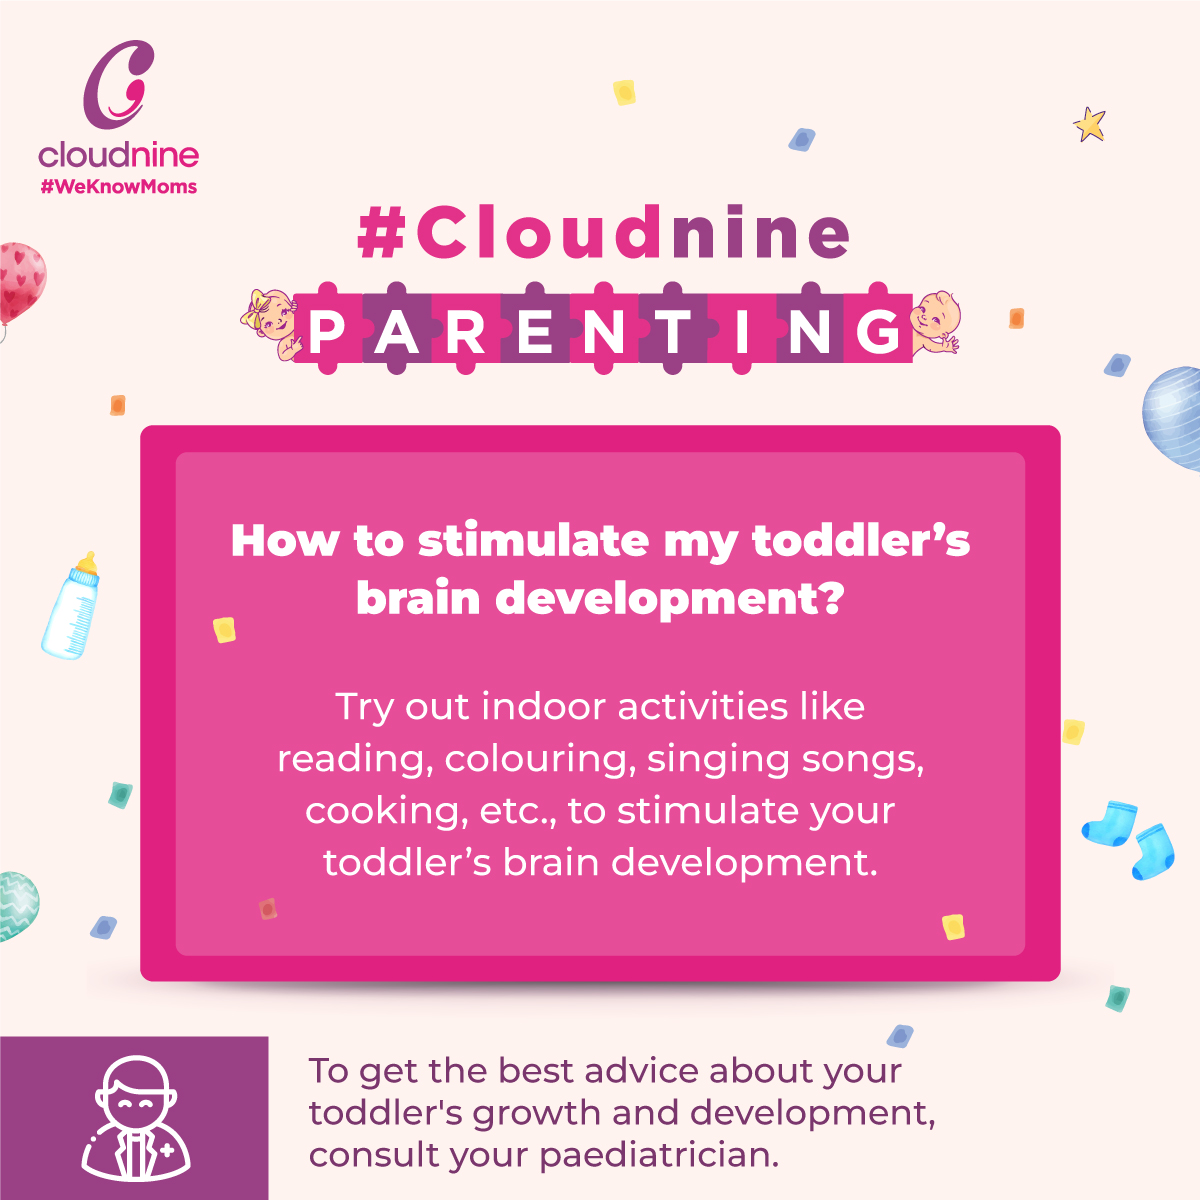 🖍 Encourage your toddler's brain development by engaging them in indoor activities like reading, colouring, singing and cooking 📚.

#WeKnowMoms #oncloudnine #parenting #babygrowth #parentingadvice #braindevelopment #indooractivities